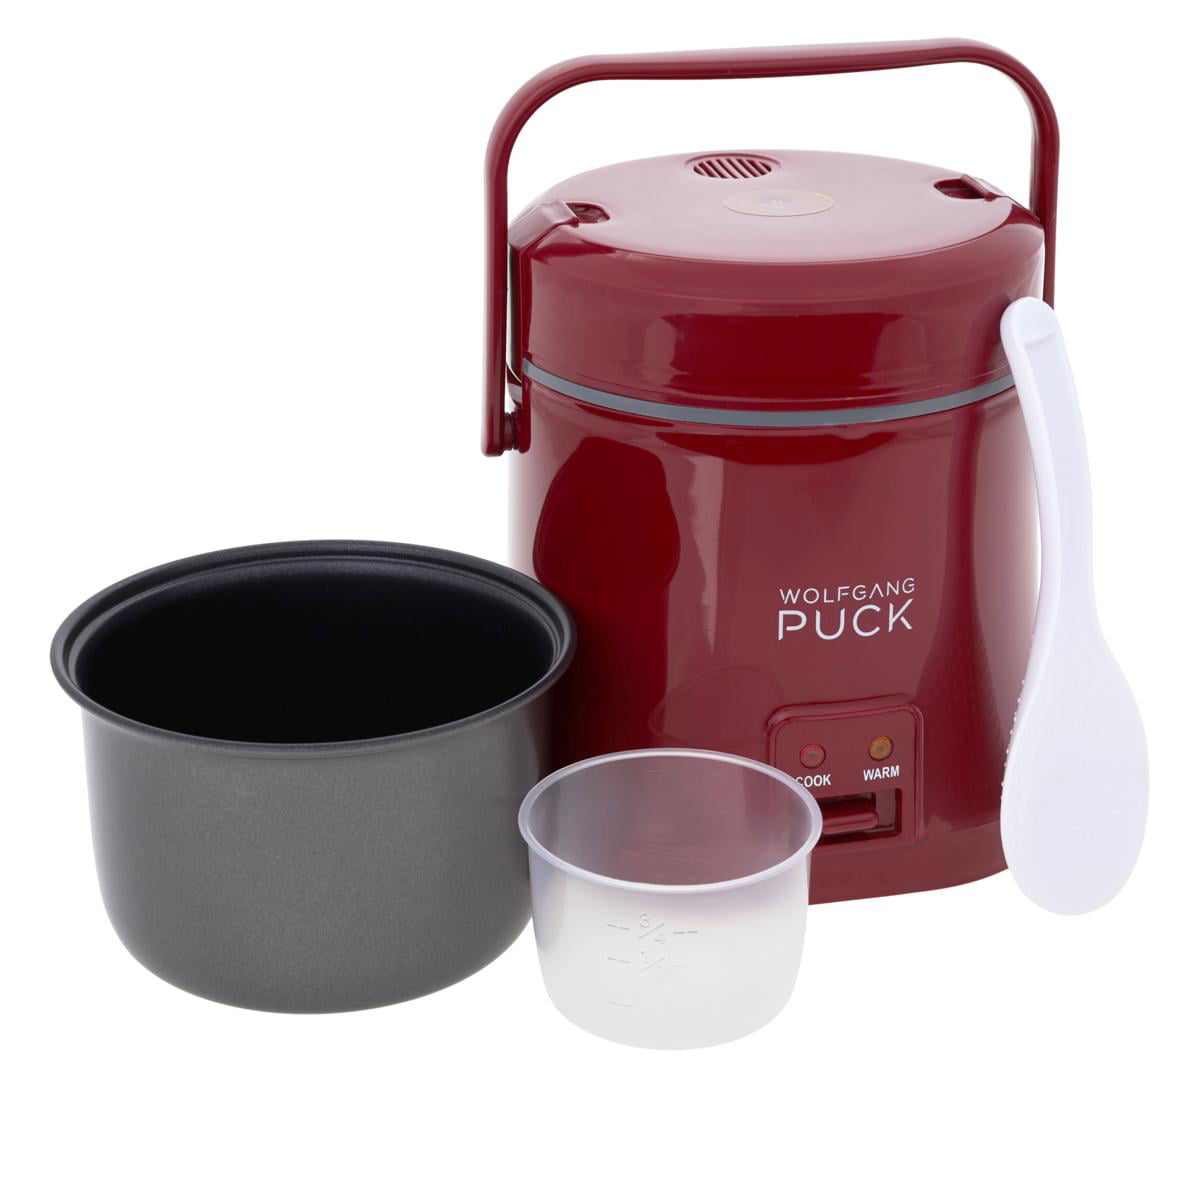 Wolfgang Puck 1.5-Cup Multi Pot Mini Cooker with Recipes Open Box